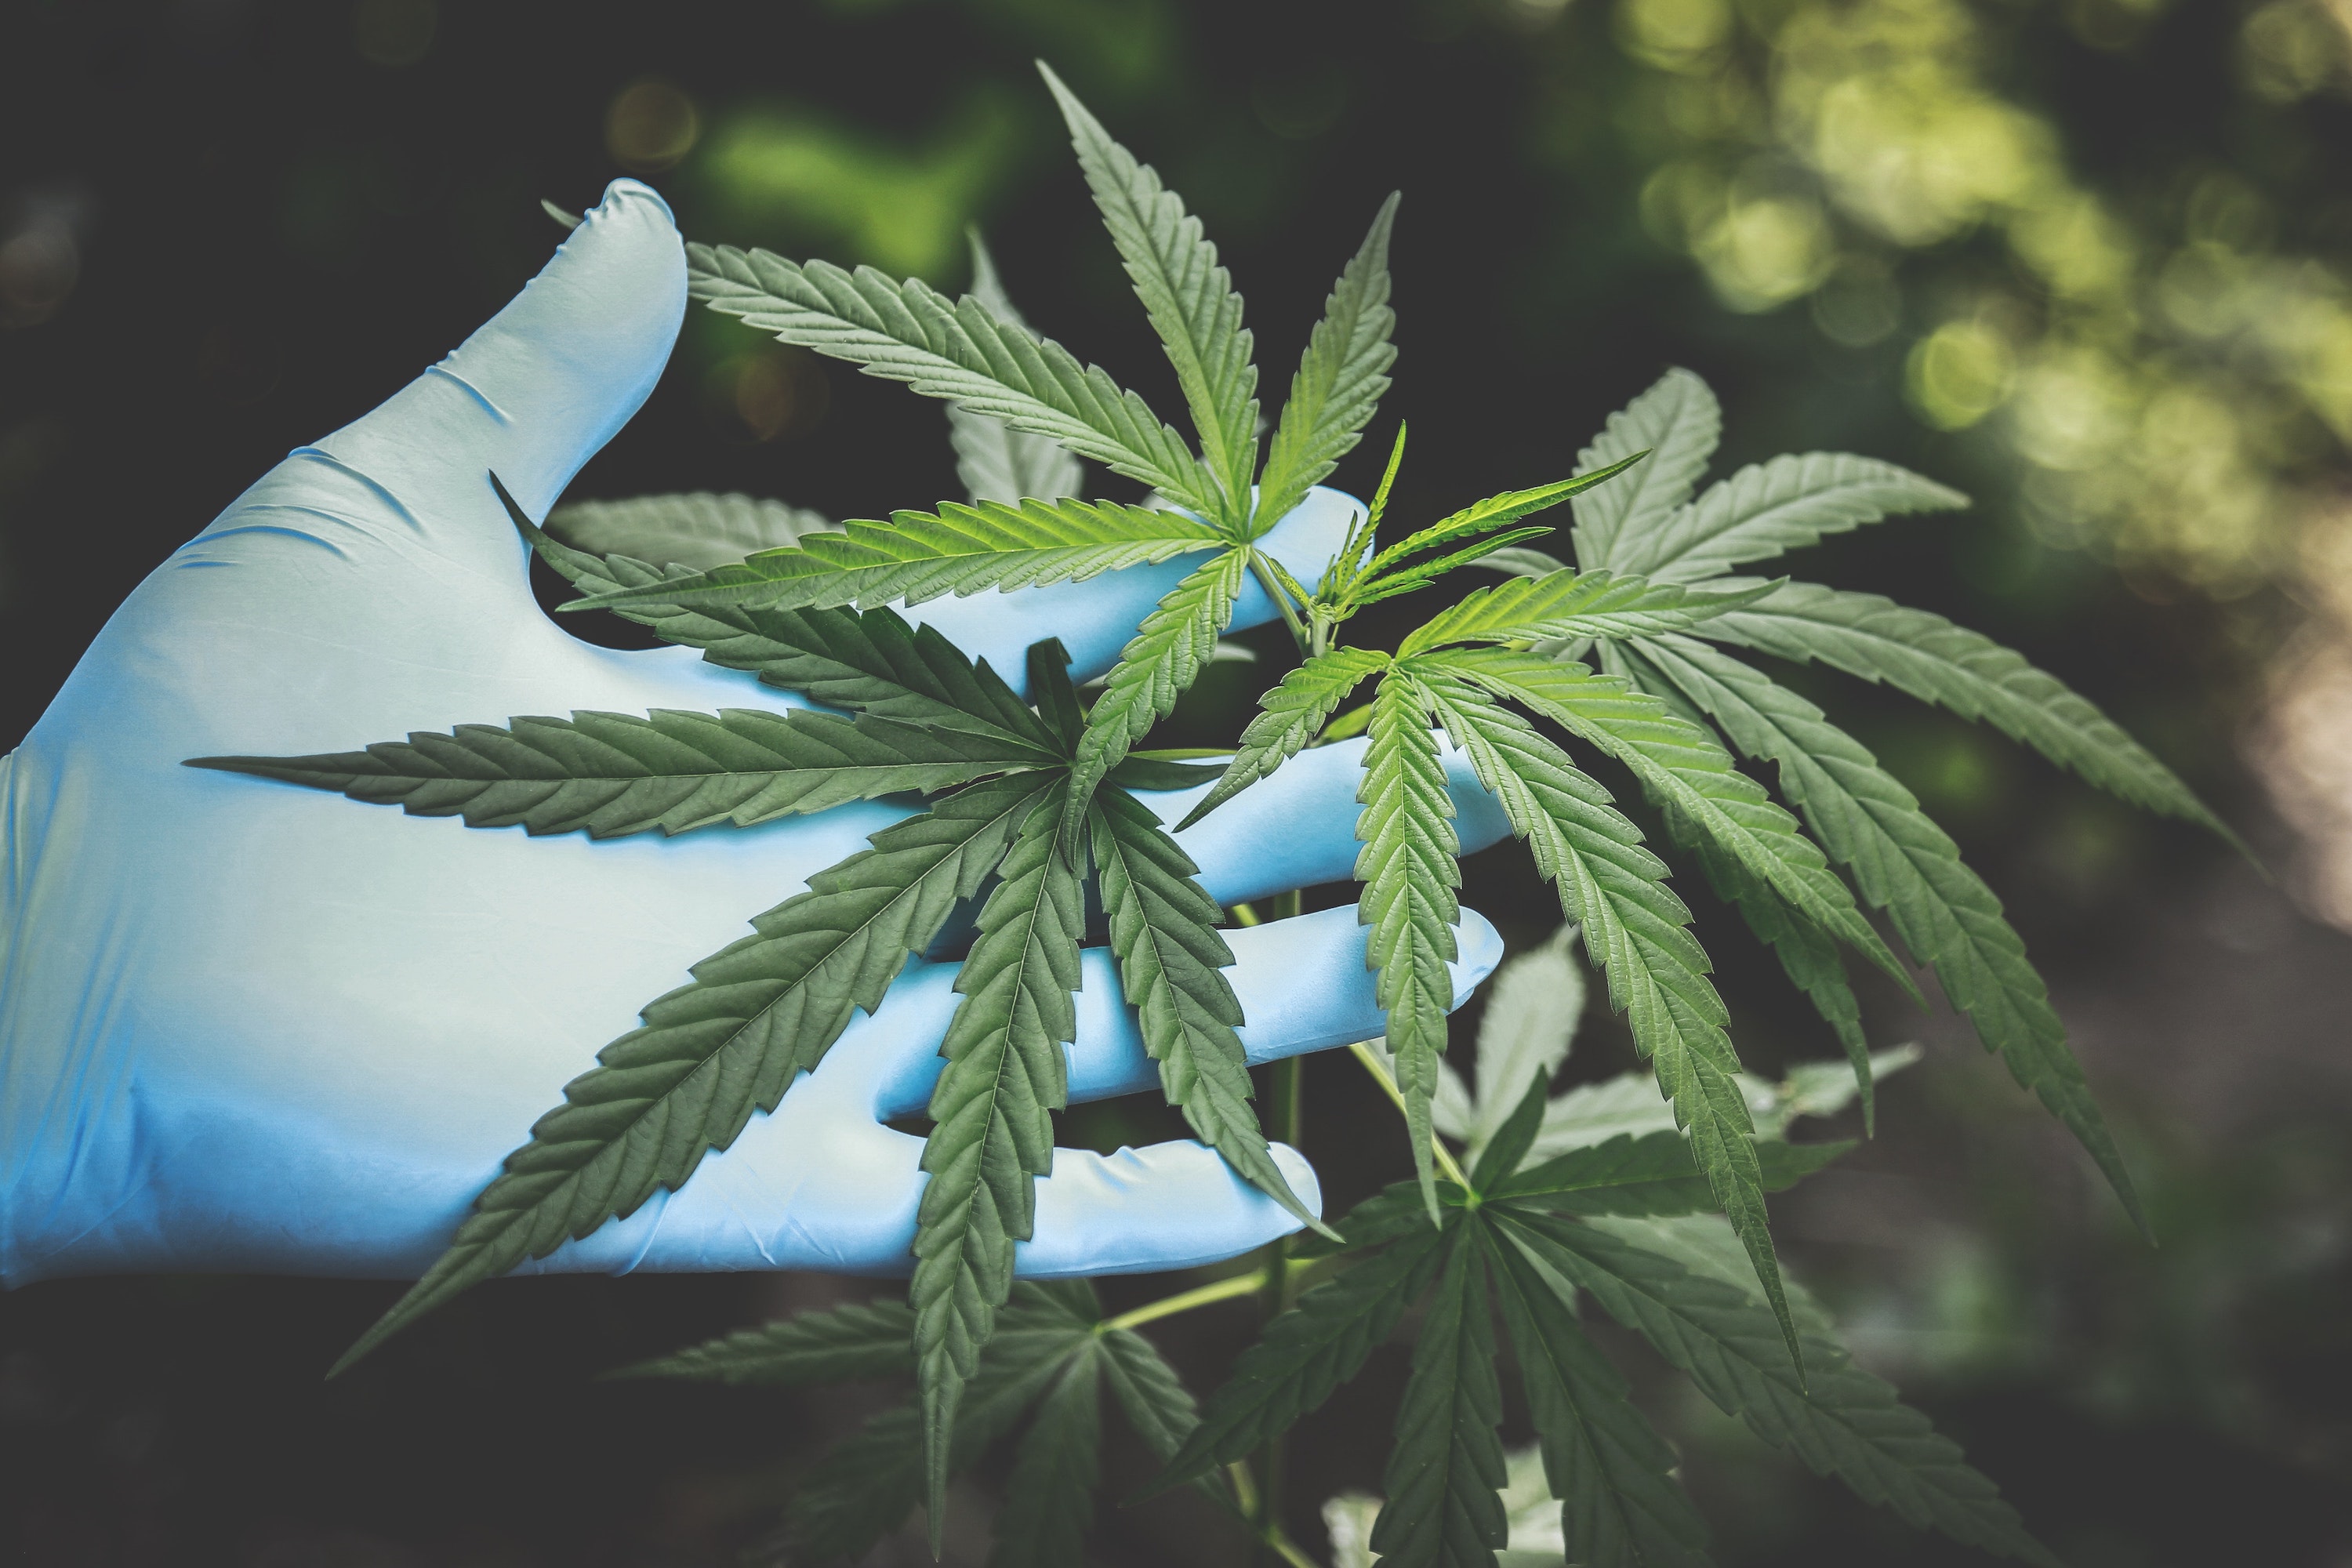 Nitrile gloved hand showing cannabis plant leaves